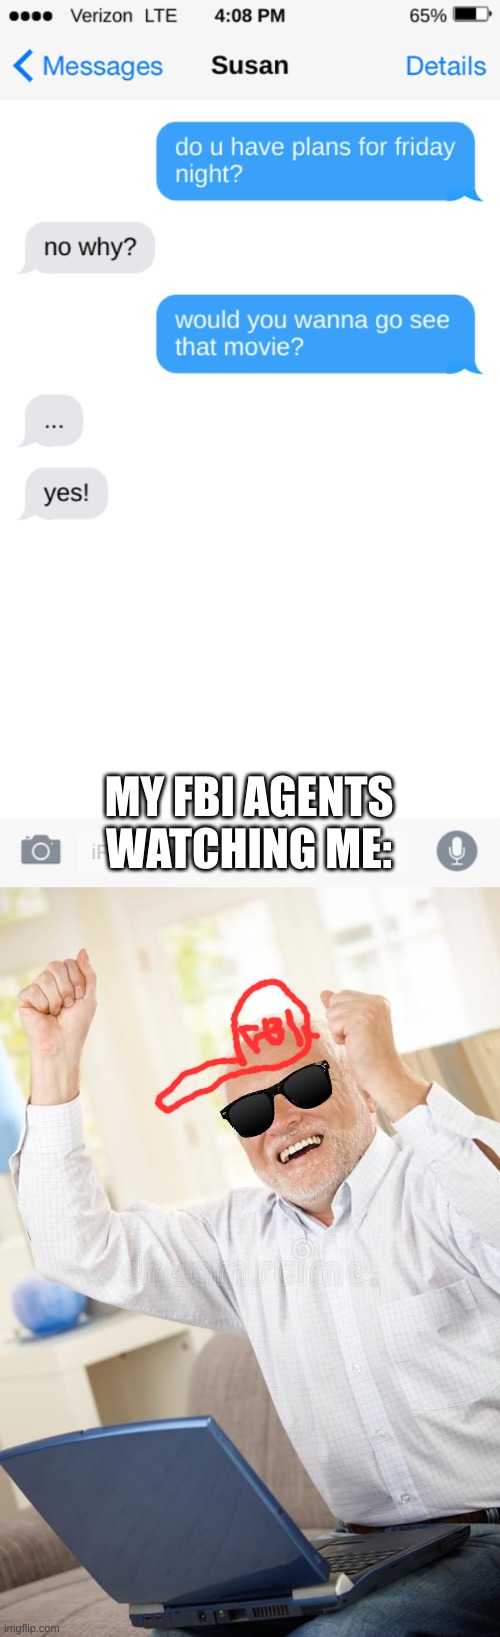 MY FBI AGENTS WATCHING ME: | image tagged in fbi | made w/ Imgflip meme maker